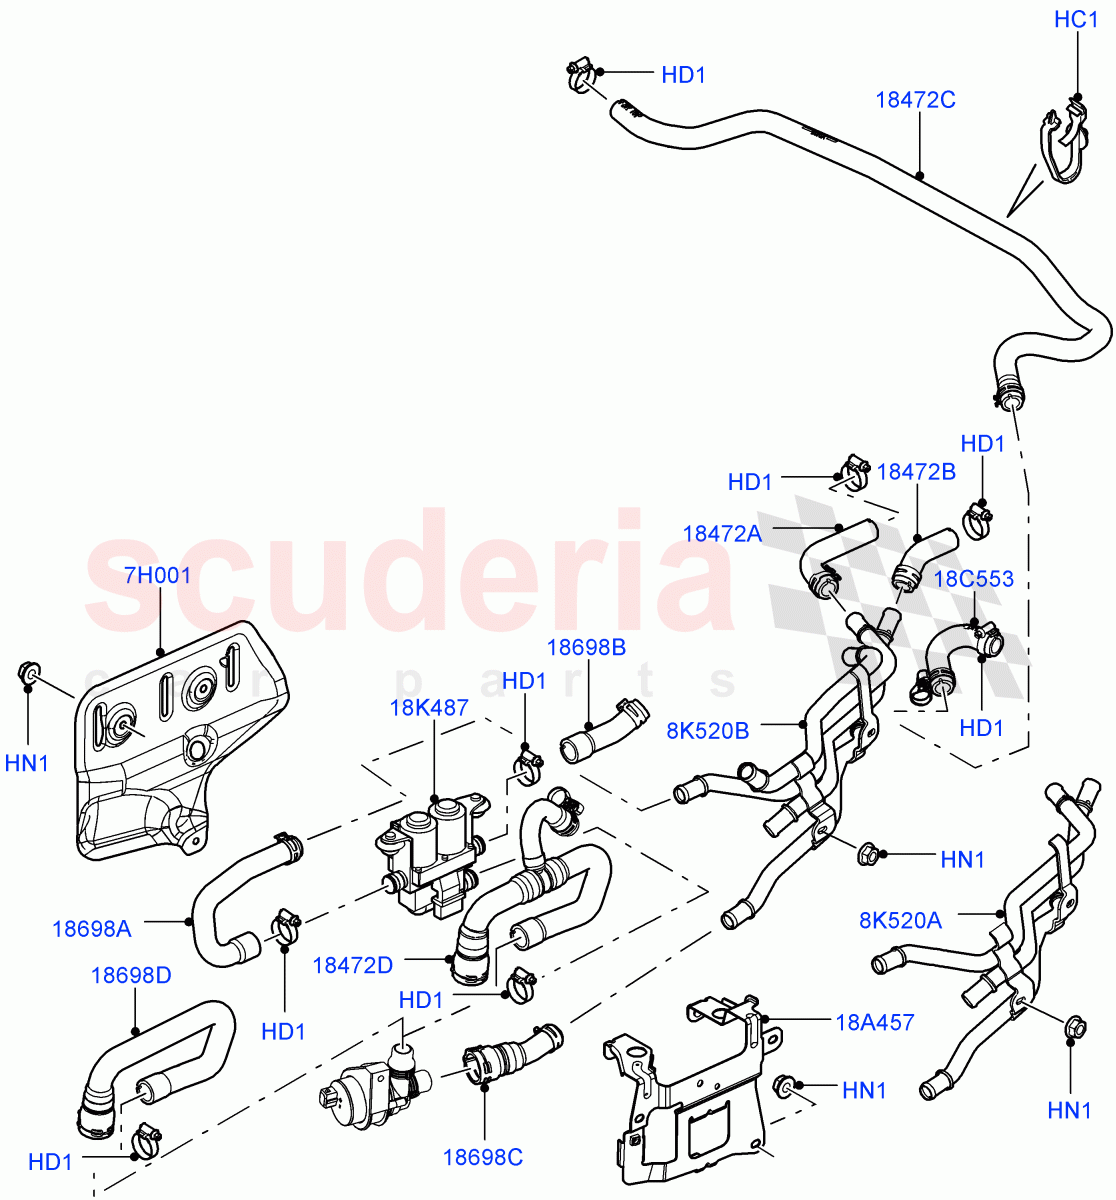 Heater Hoses(Heater Water Control, Front)((V)FROMAA000001,(V)TOAA999999) of Land Rover Land Rover Range Rover (2010-2012) [3.6 V8 32V DOHC EFI Diesel]